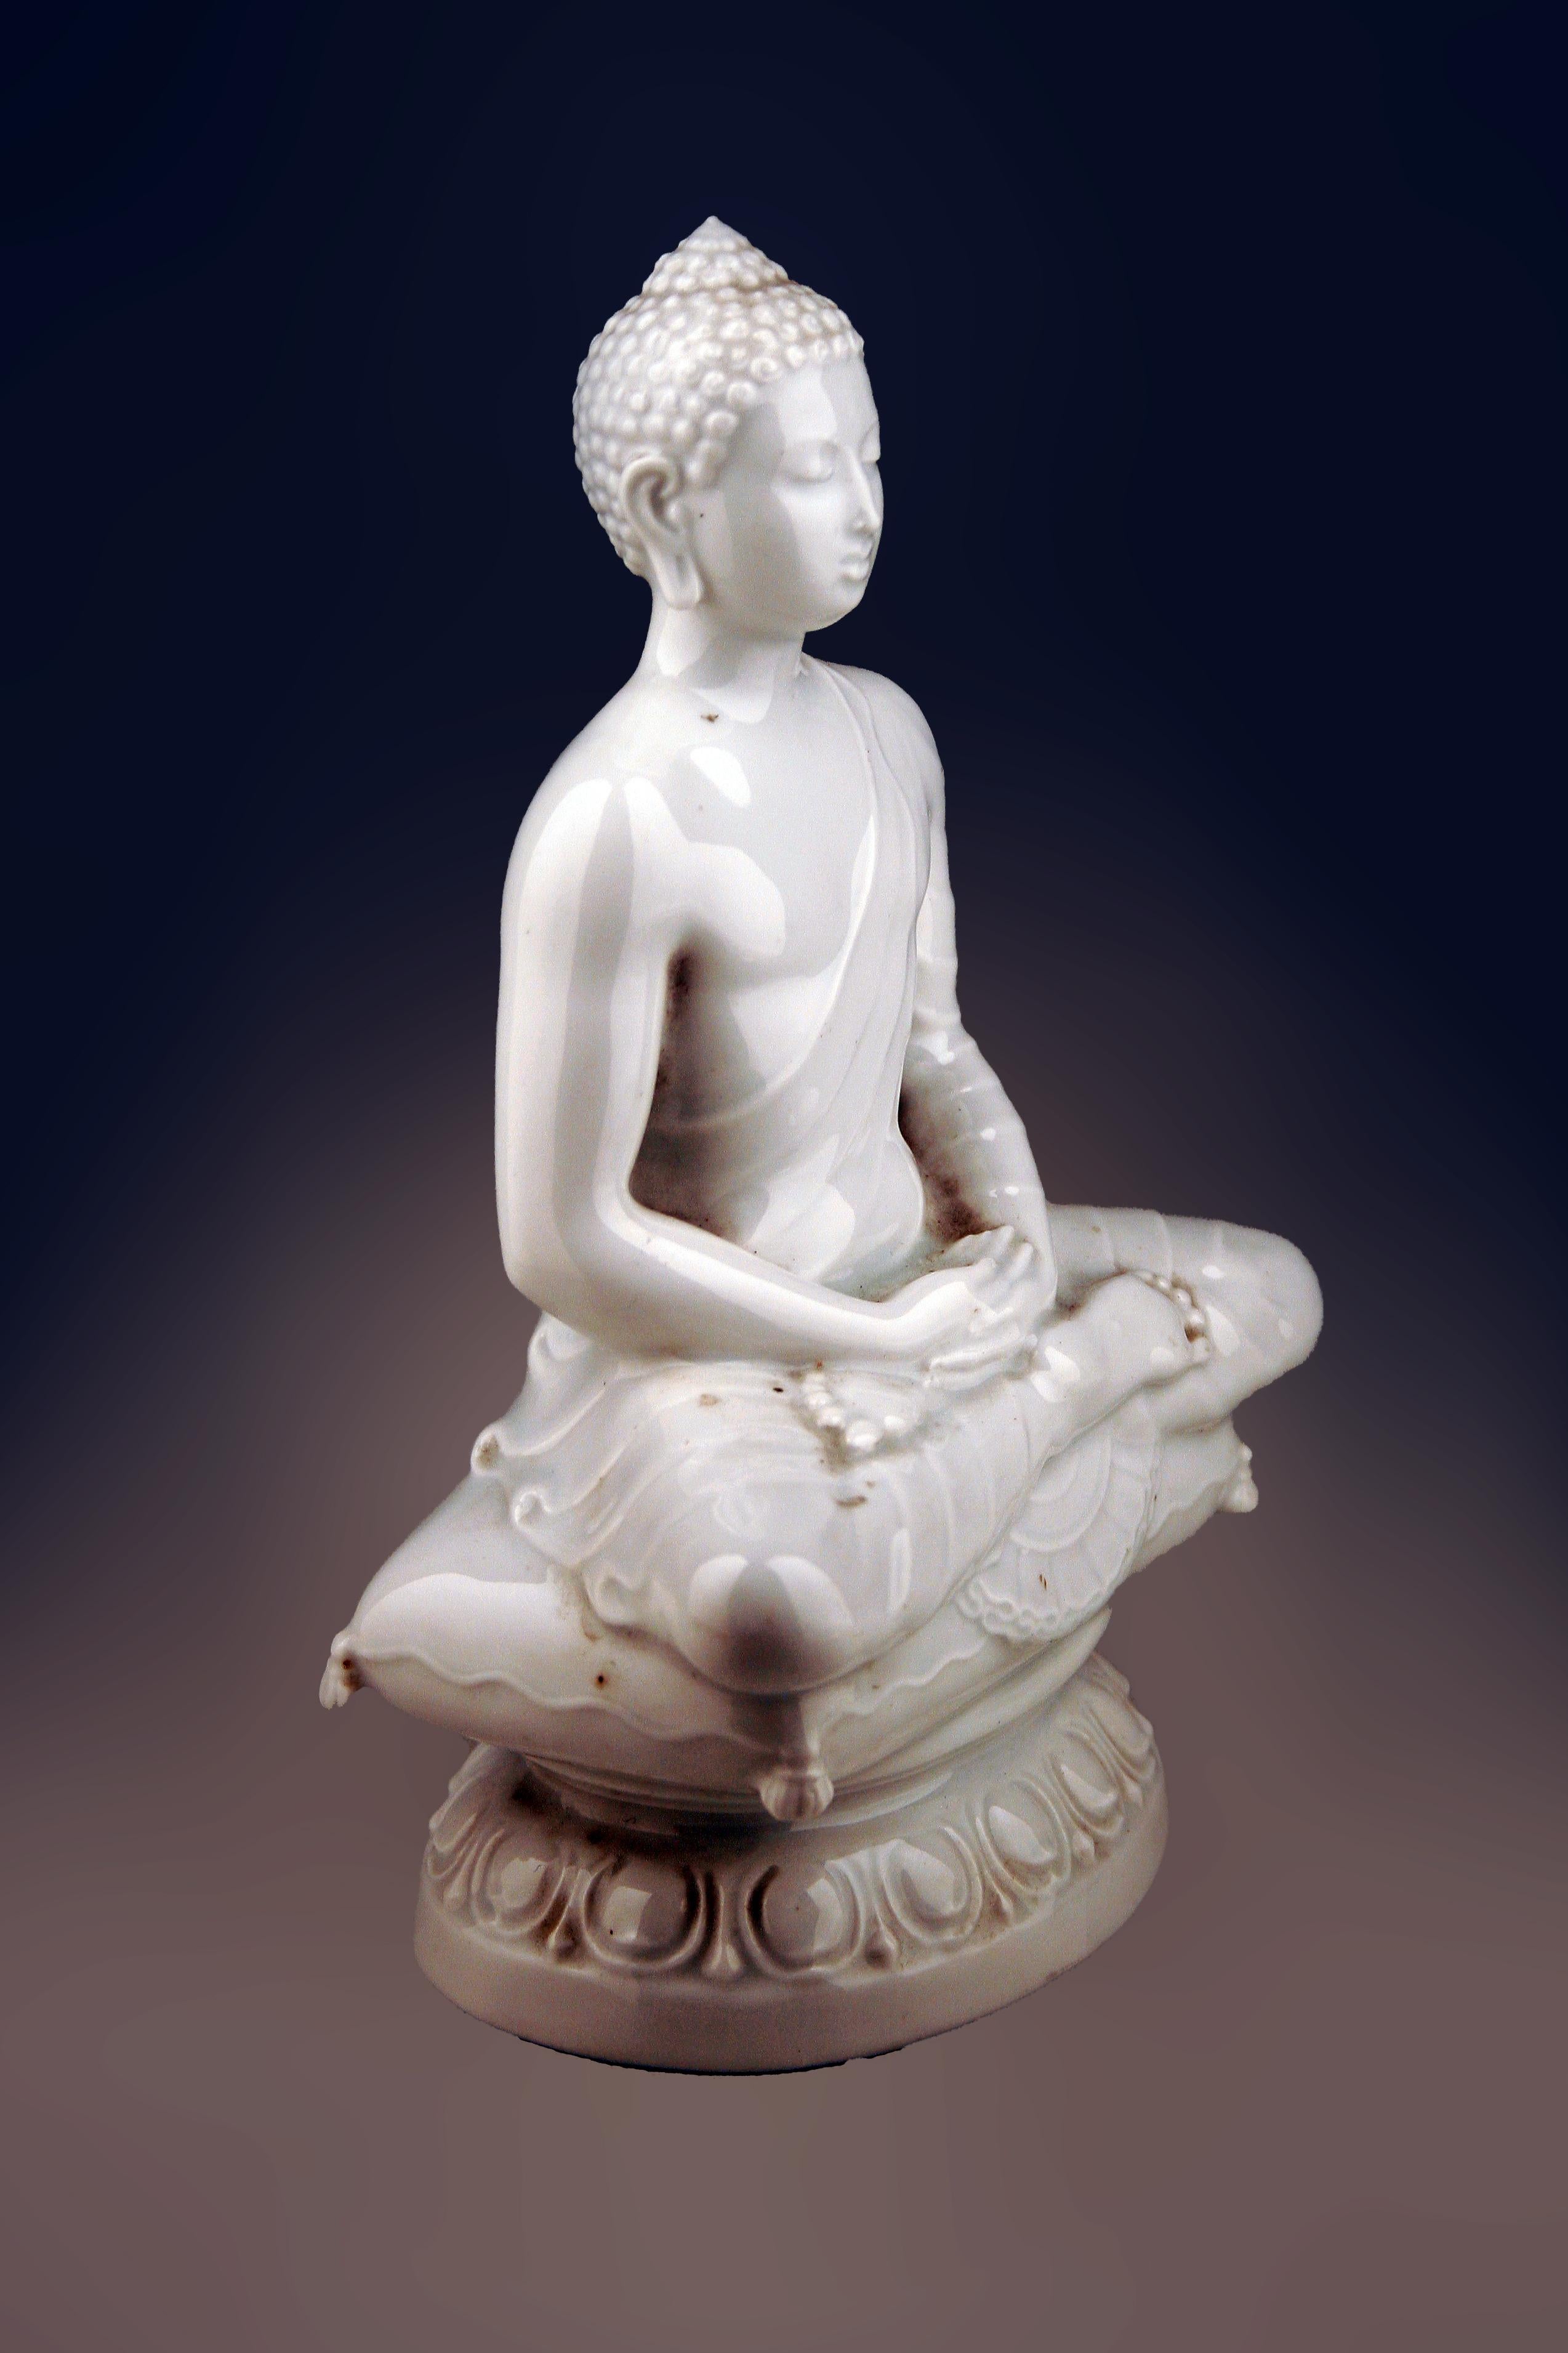 Art Deco Art Déco German Glazed Porcelain Sculpture of a Sitting Buddha by Rosenthal For Sale